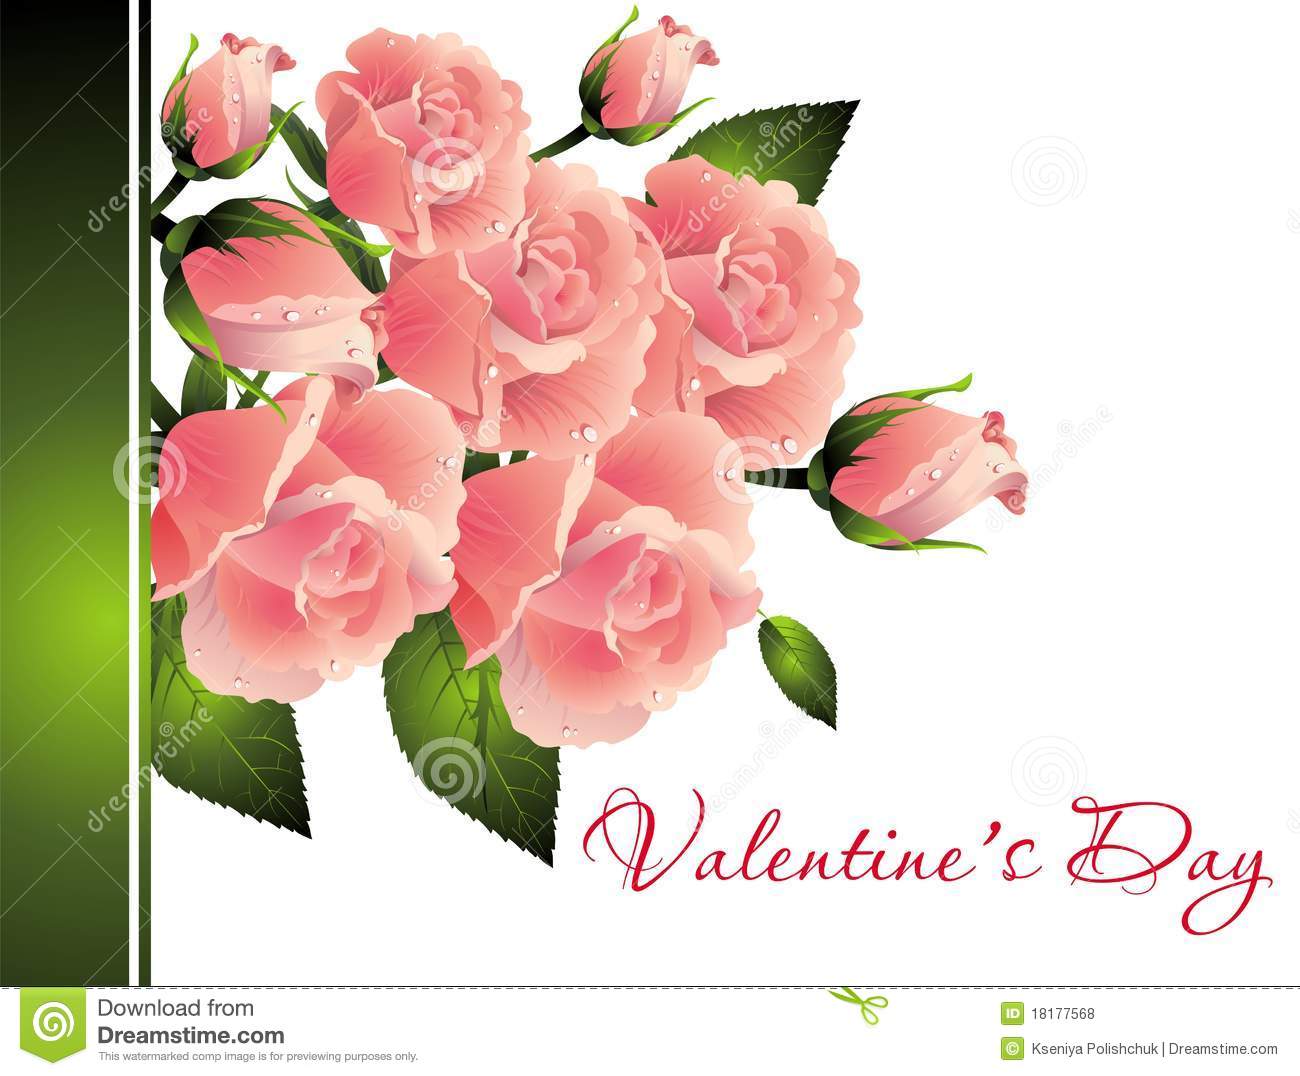 Bouquet Of Roses For Valentine S Day Royalty Free Stock Photos   Image